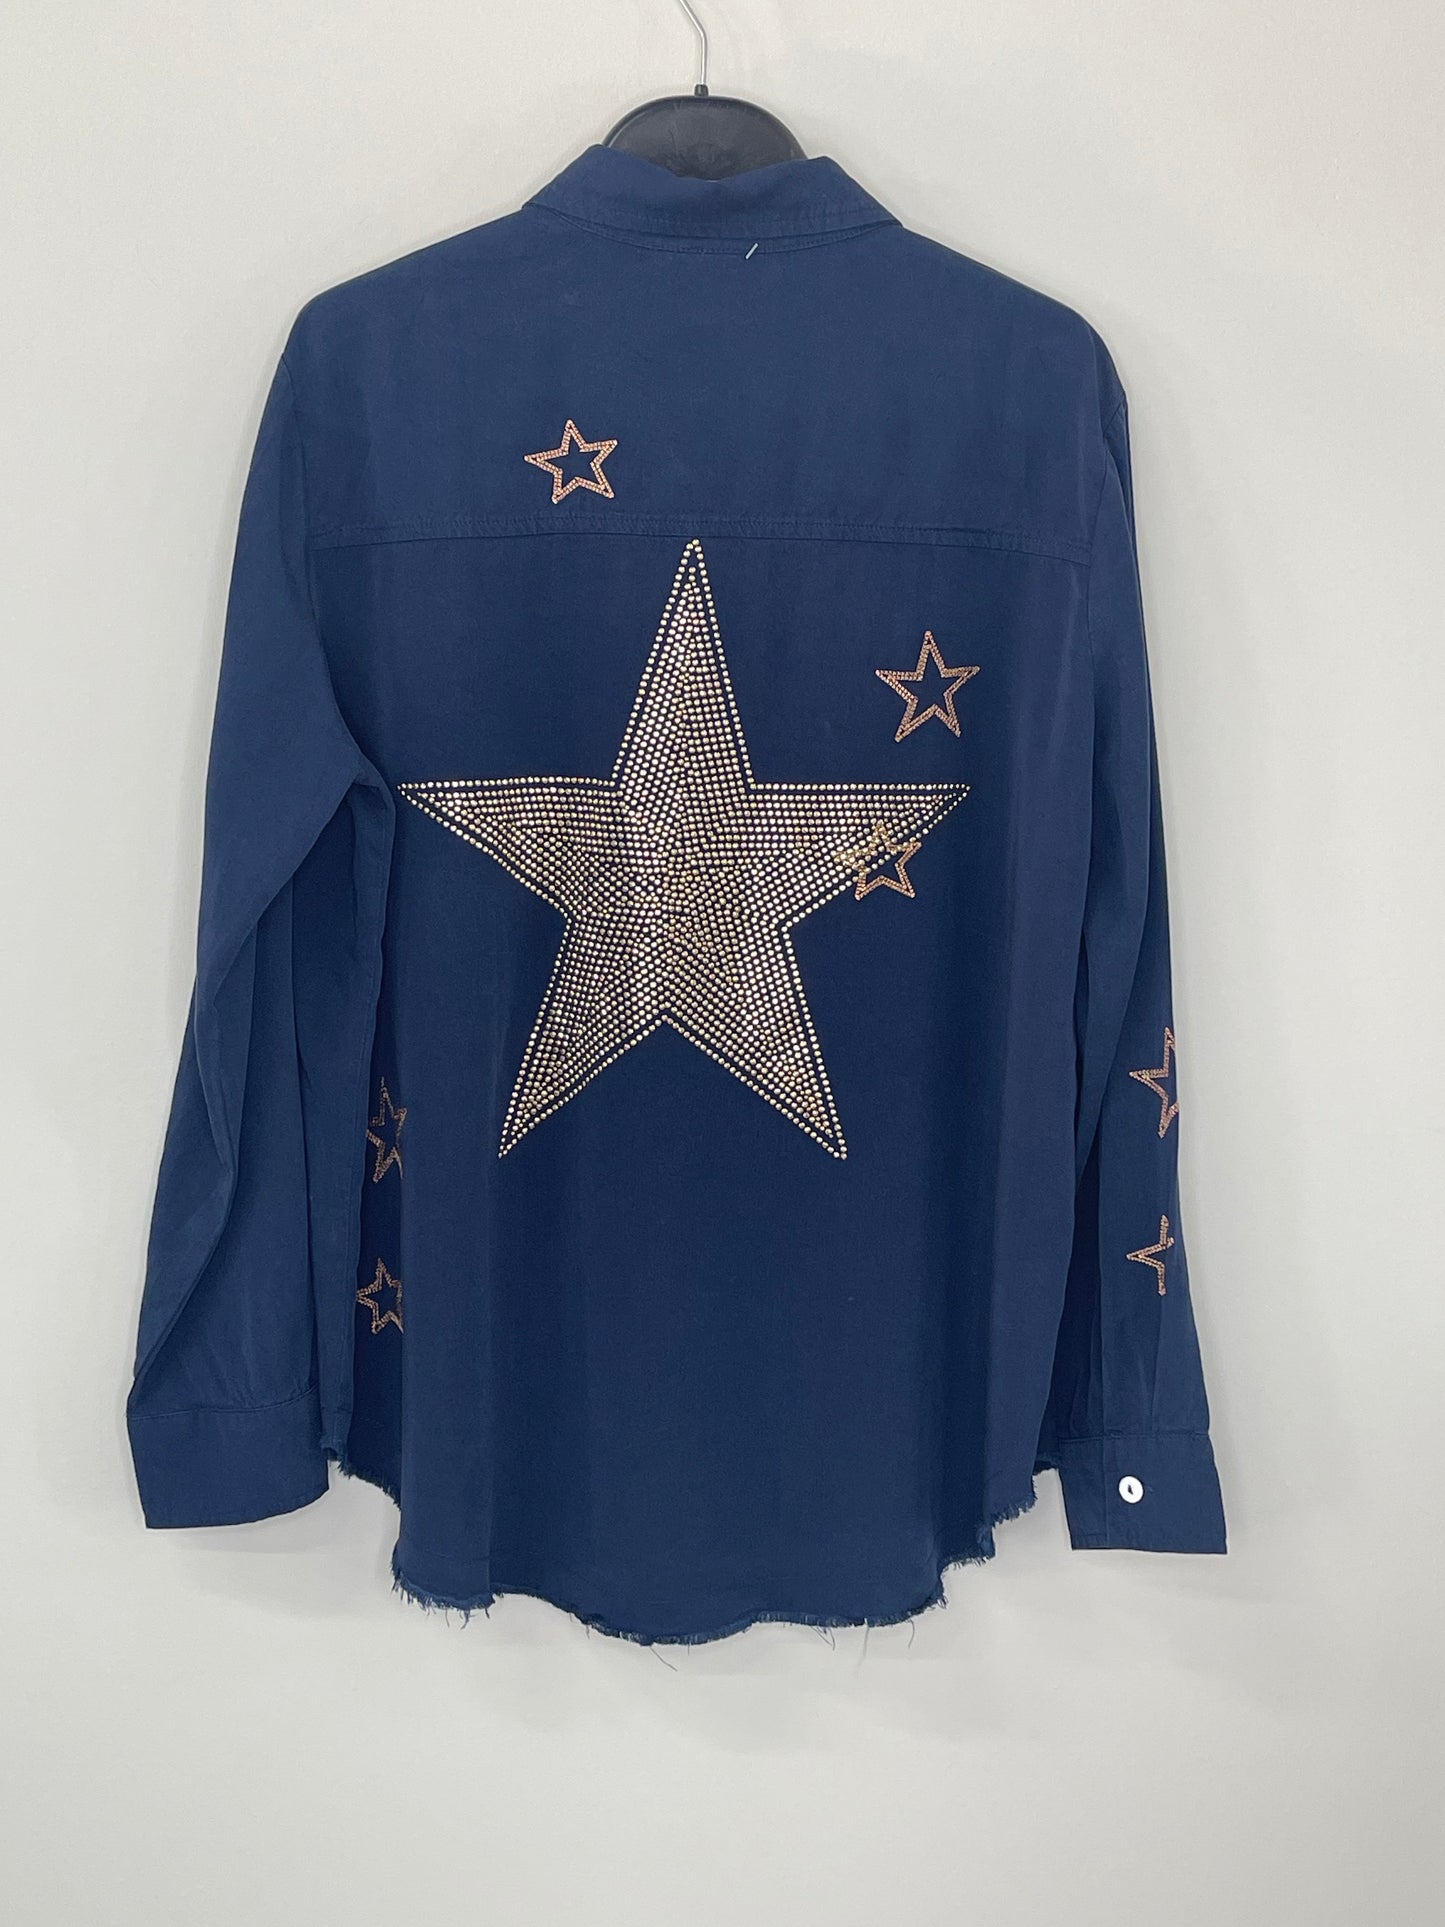 Shirt, Embroidered Star Navy, Champagne Star